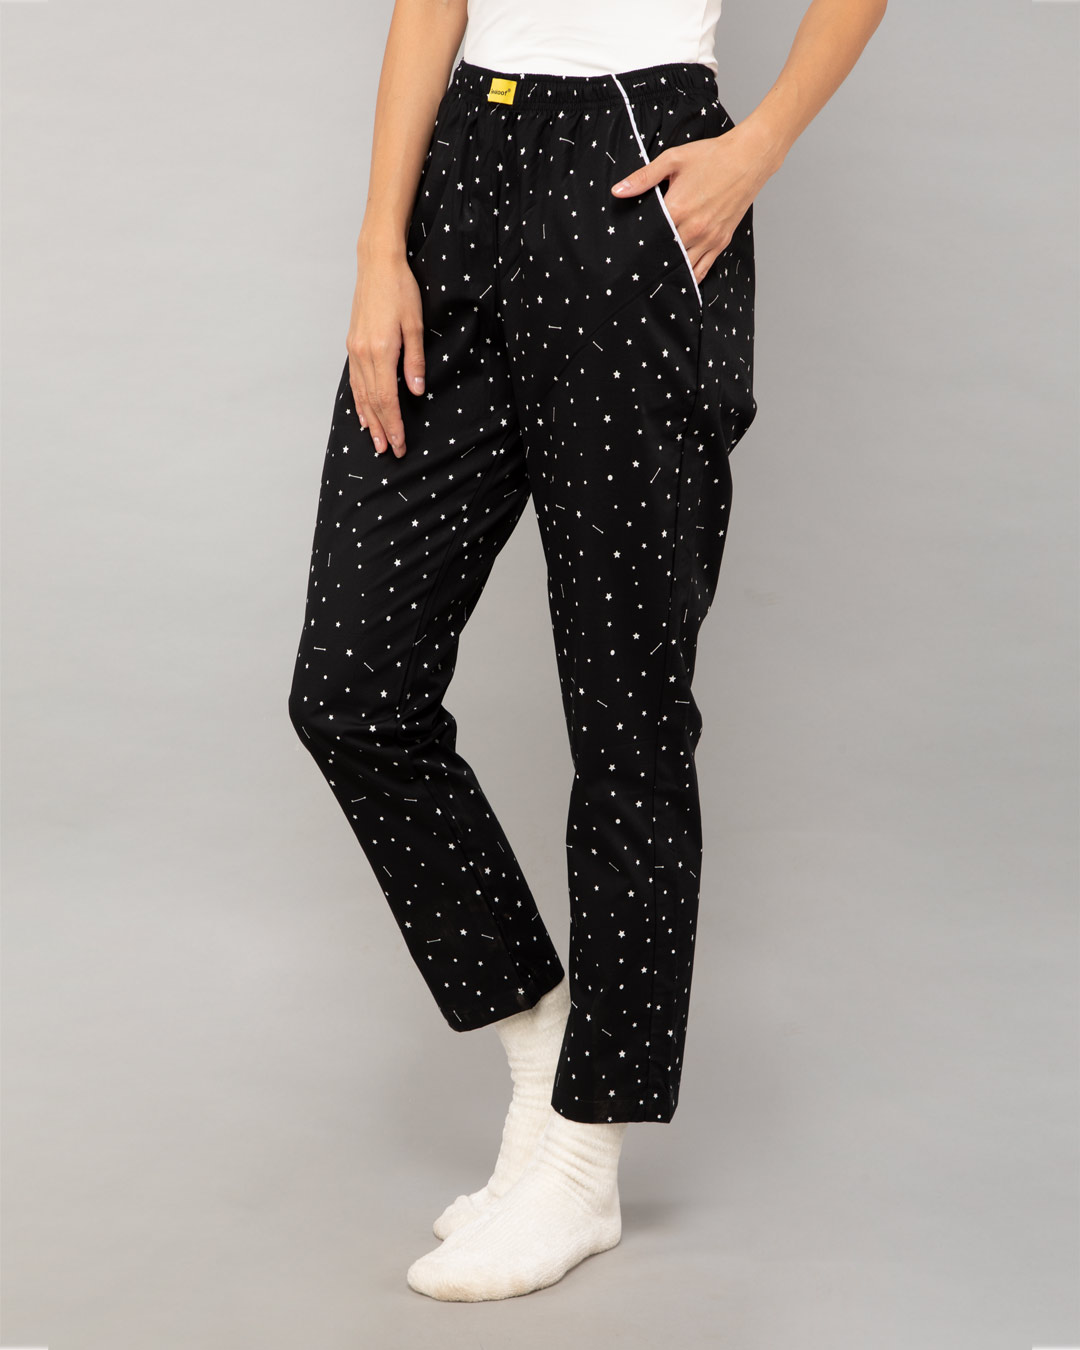 Shop Starry Galaxy All Over Printed Pyjama-Back